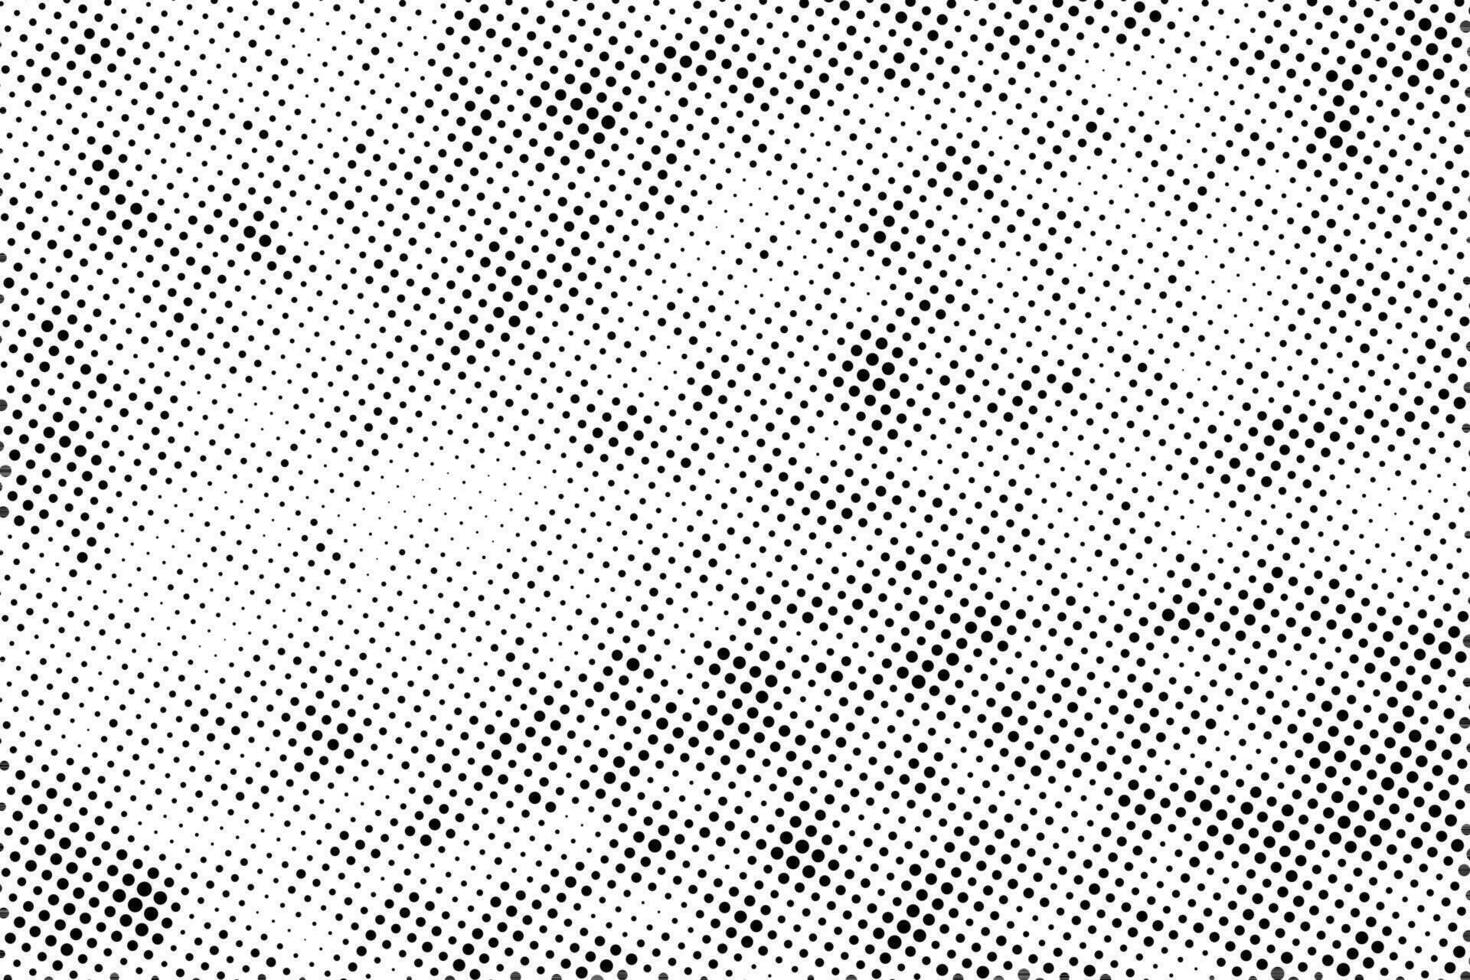 Vector grunge vintage halftone texture. Abstract black dots pattern.